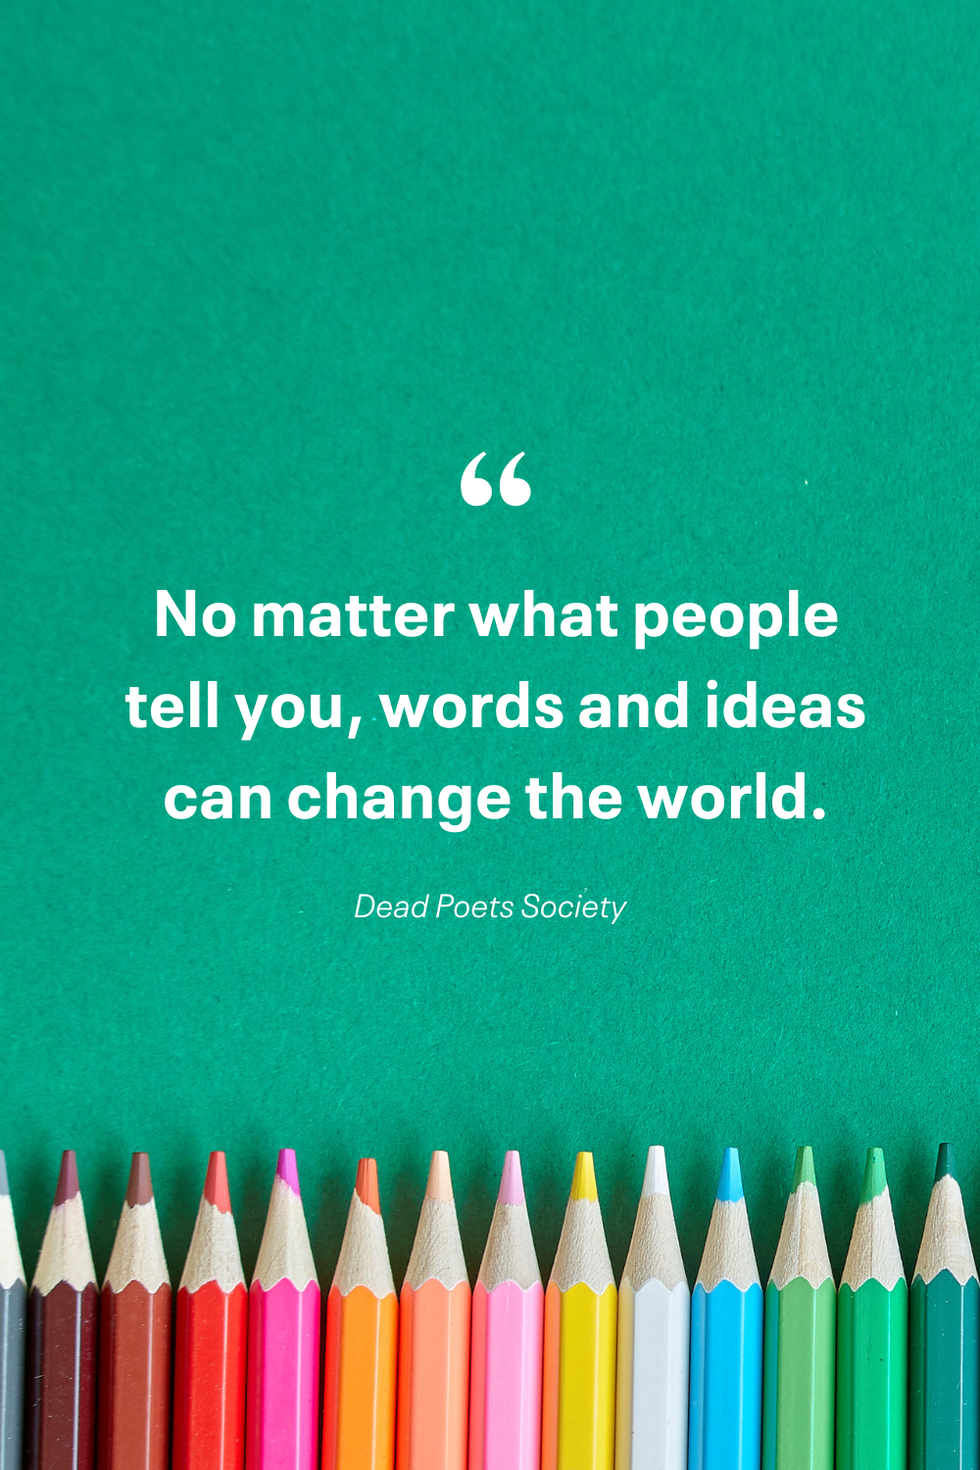 no matter what people tell you words and ideas can change the world 'dead poets society'